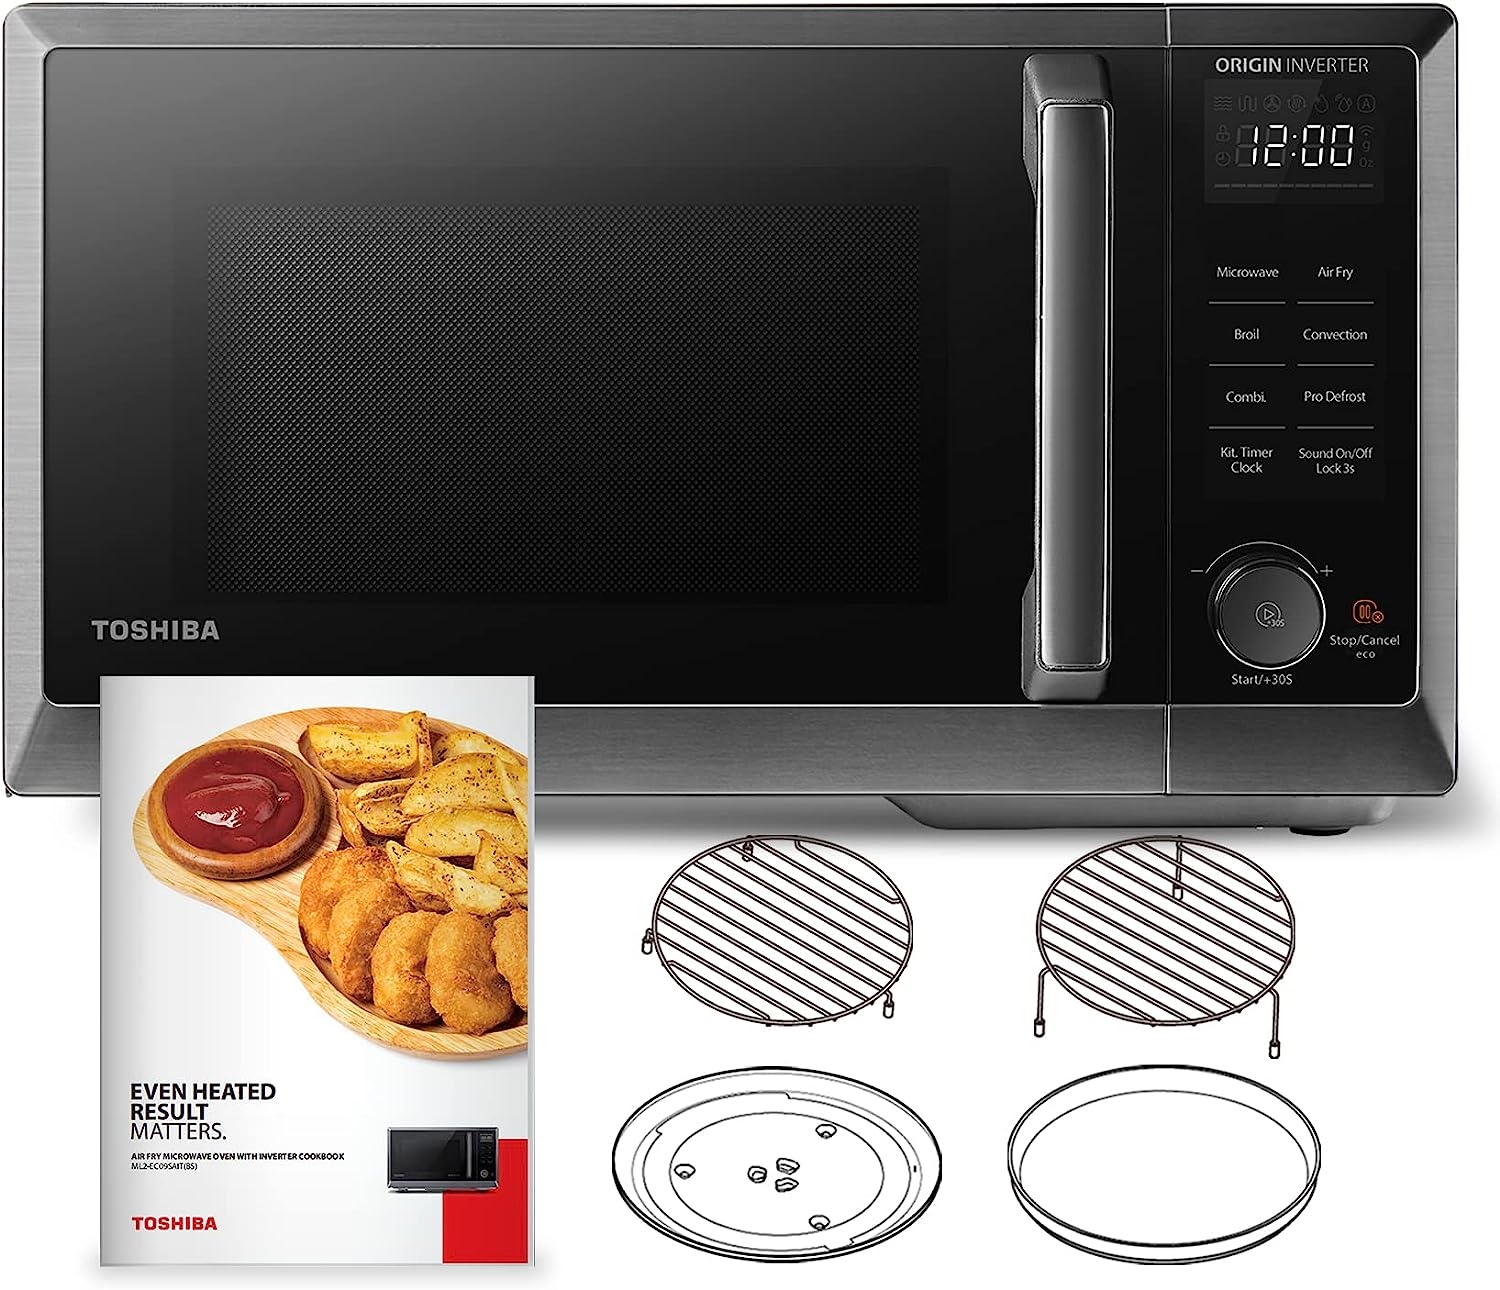 TOSHIBA Inverter Microwave Toaster Oven | DeviceDaily.com